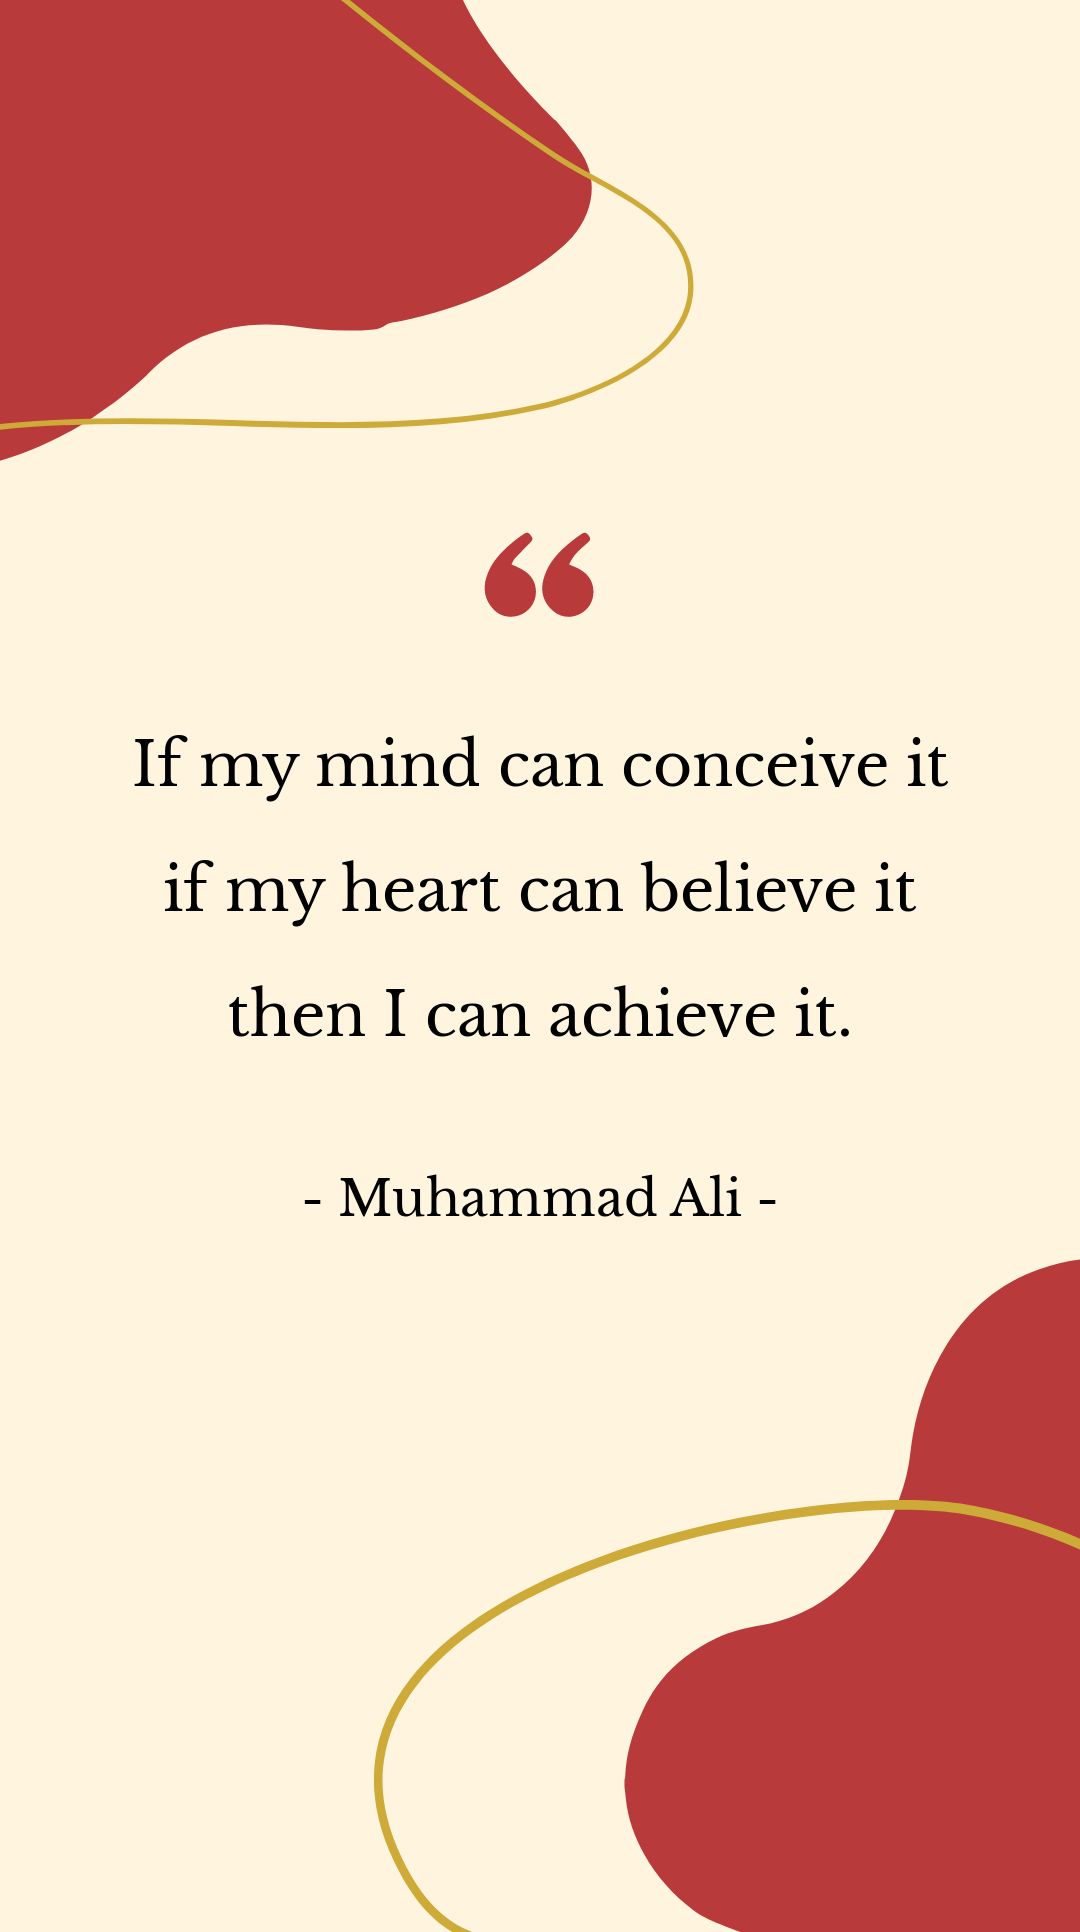 Muhammad Ali - If my mind can conceive it if my heart can believe it then I can achieve it.